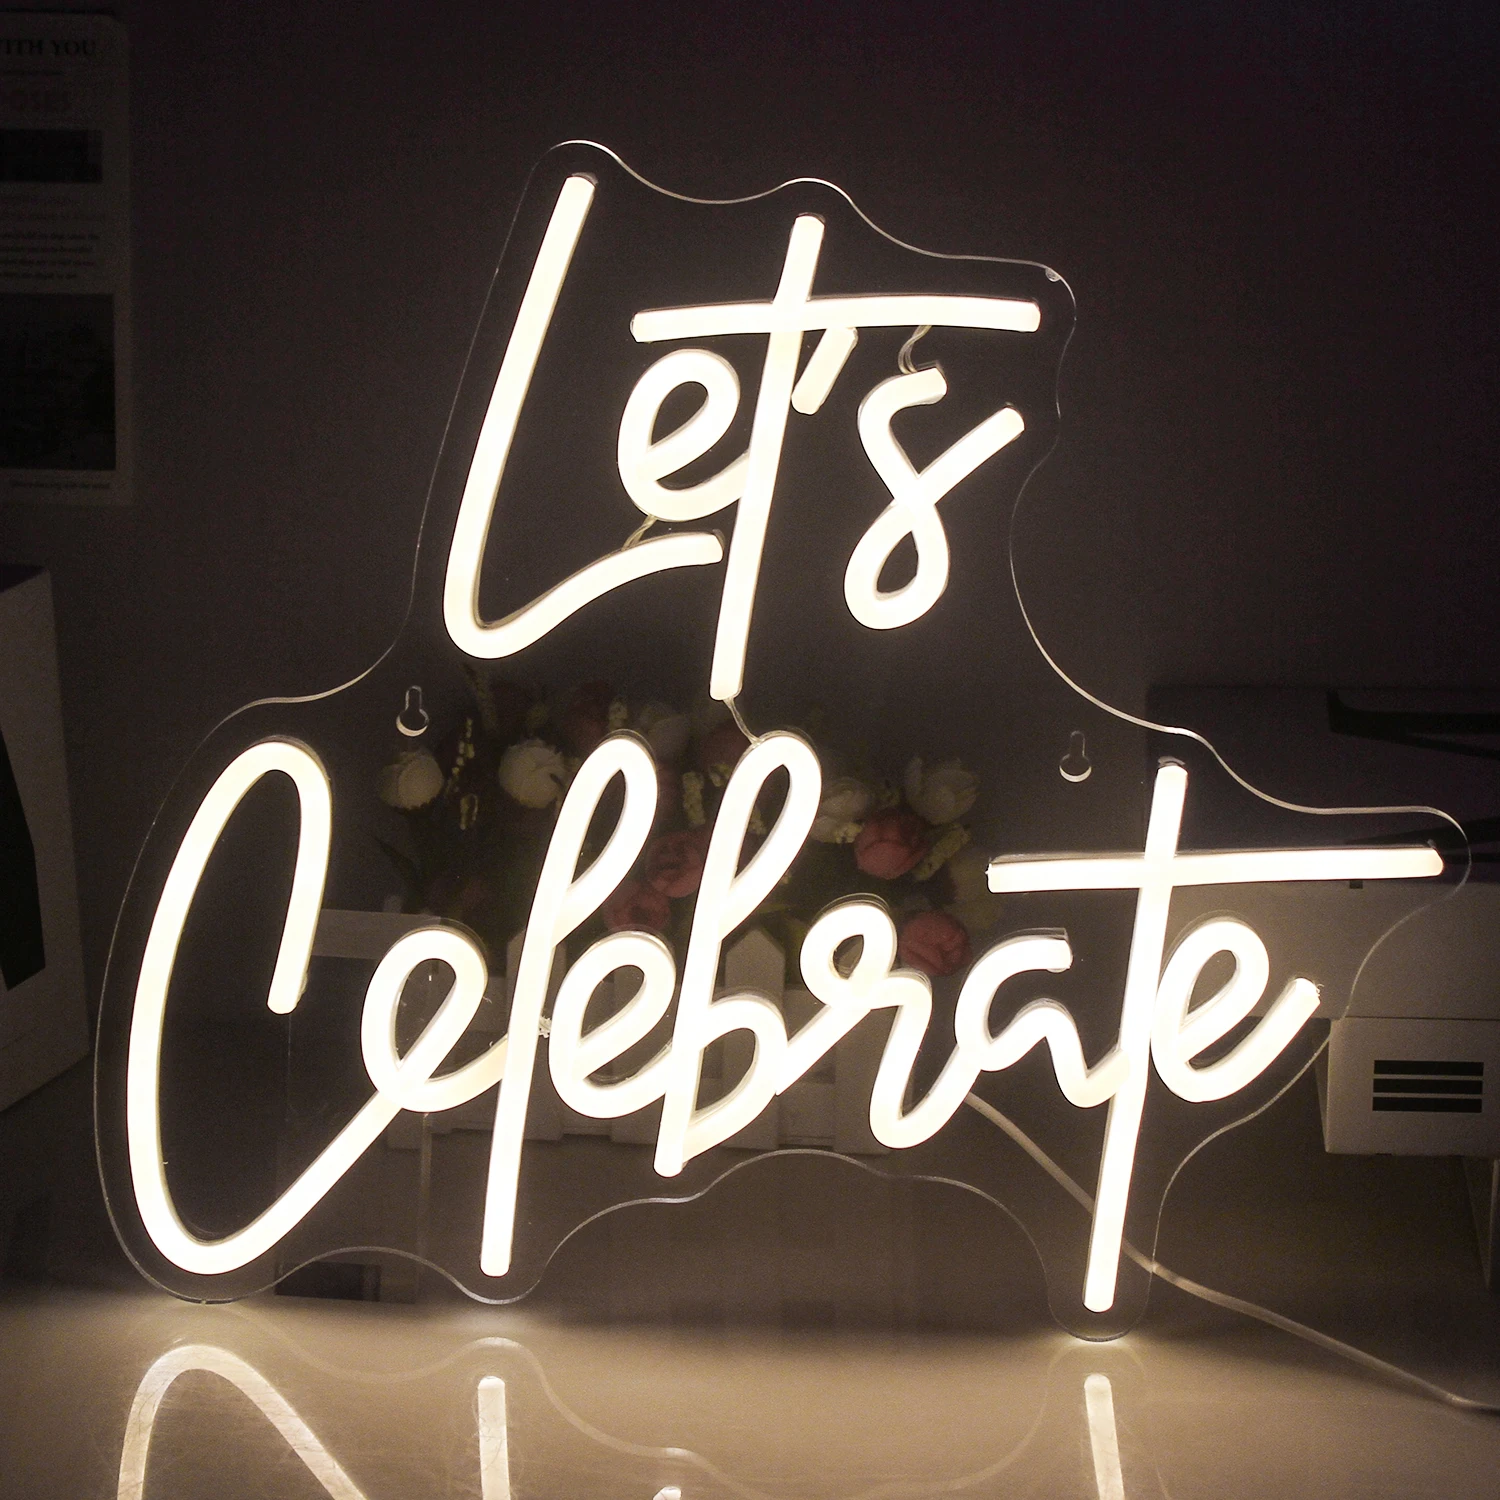 Let's Celebrate LED Neon Light Sign Studio Room Home Christmas Party Bar Outdoor Wedding House Wall Decor Kids Night Lamps Decor